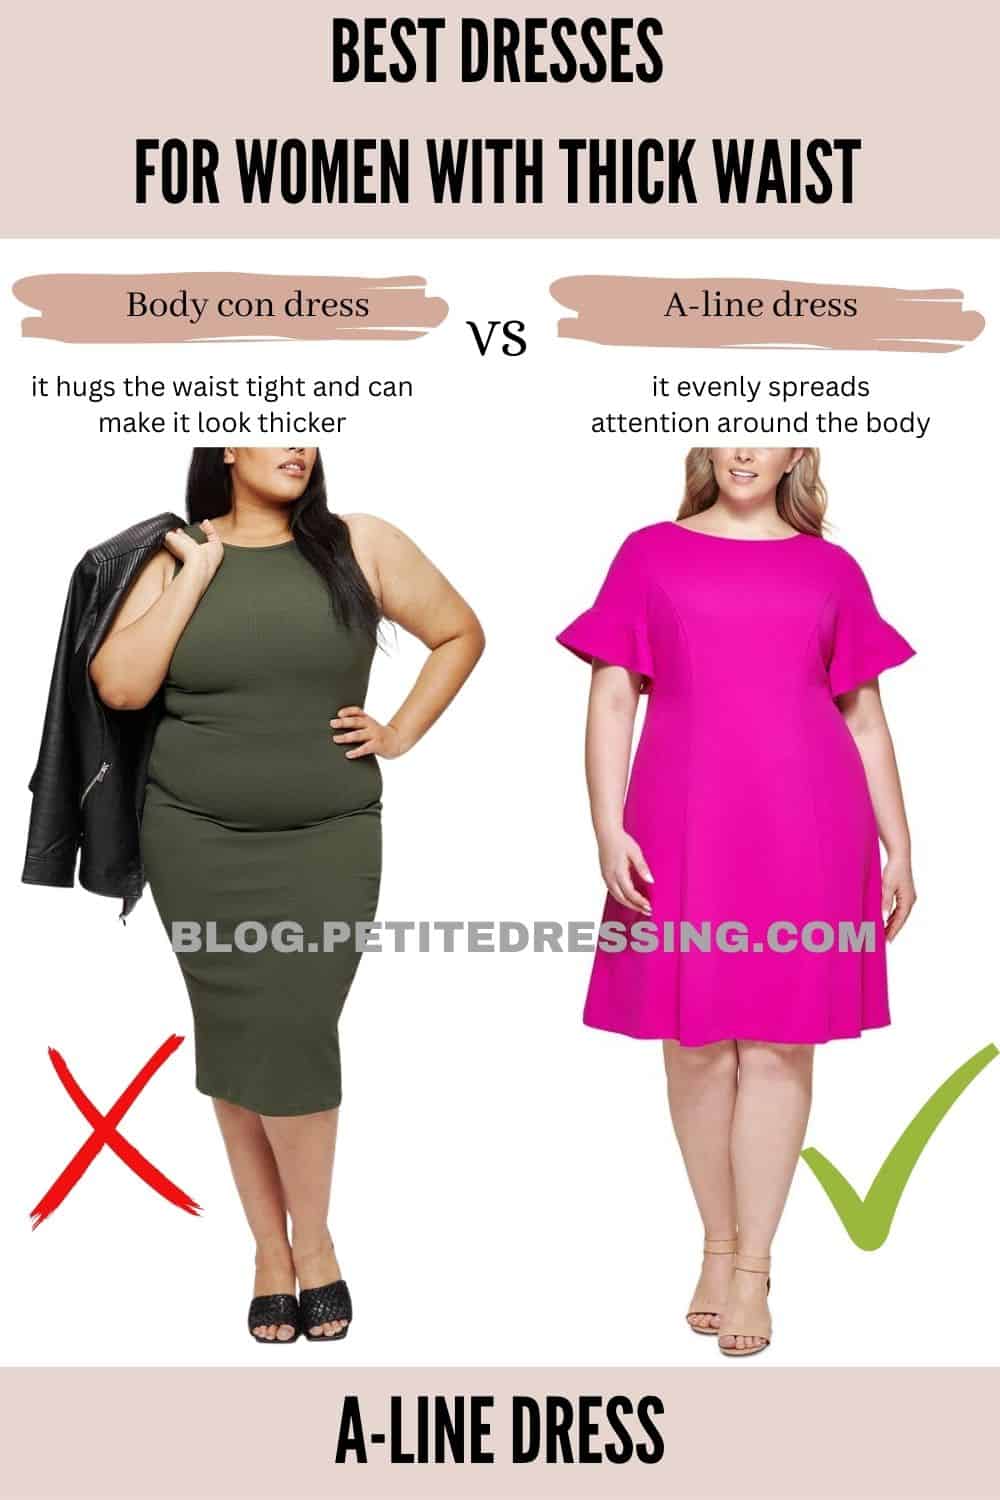 The Complete Dress Guide for Women with a Thick Waist